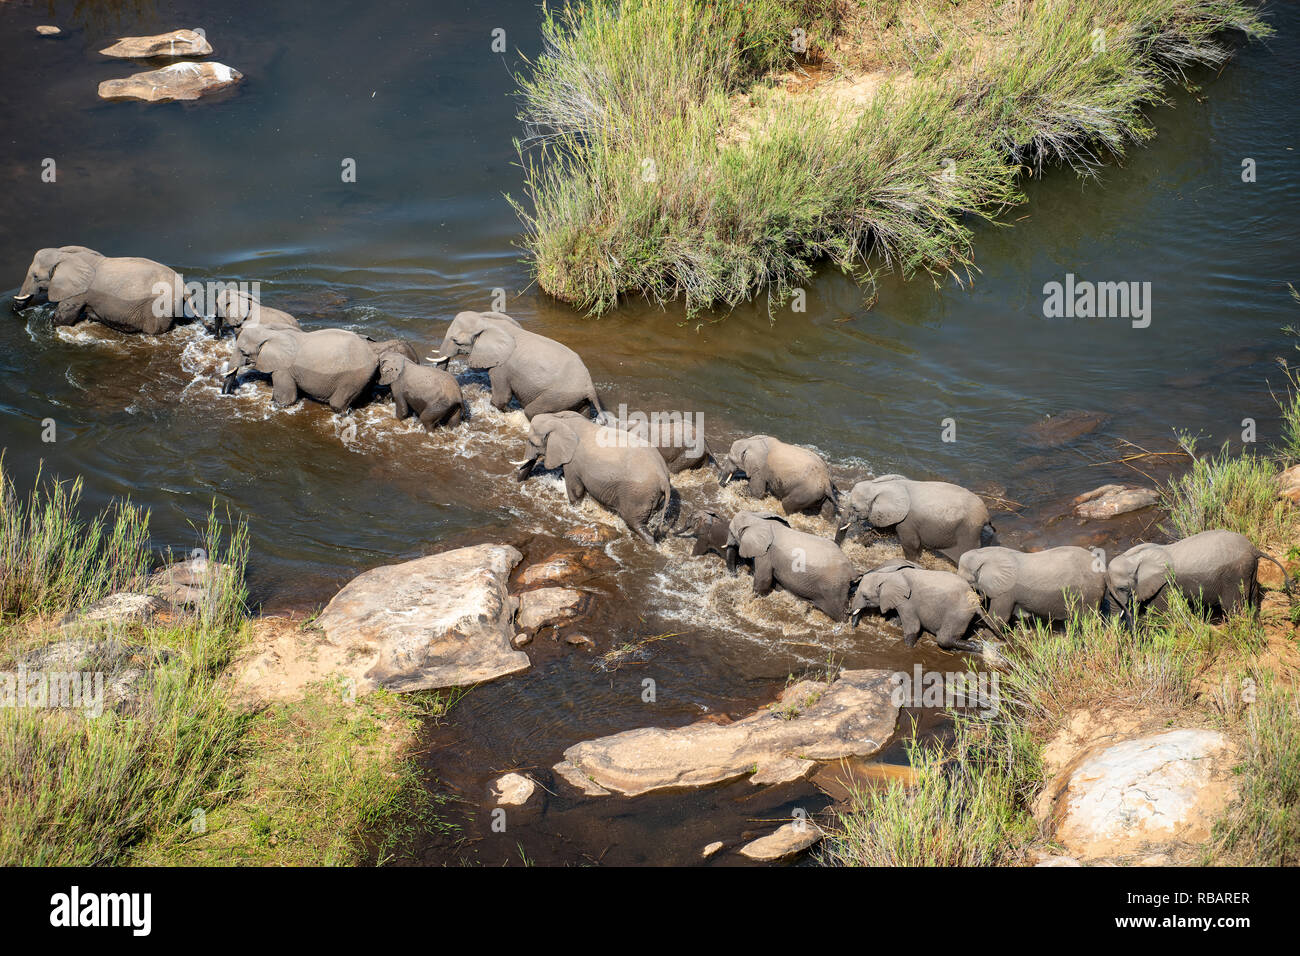 African Elephants in South Africa's Kruger National Park. Stock Photo